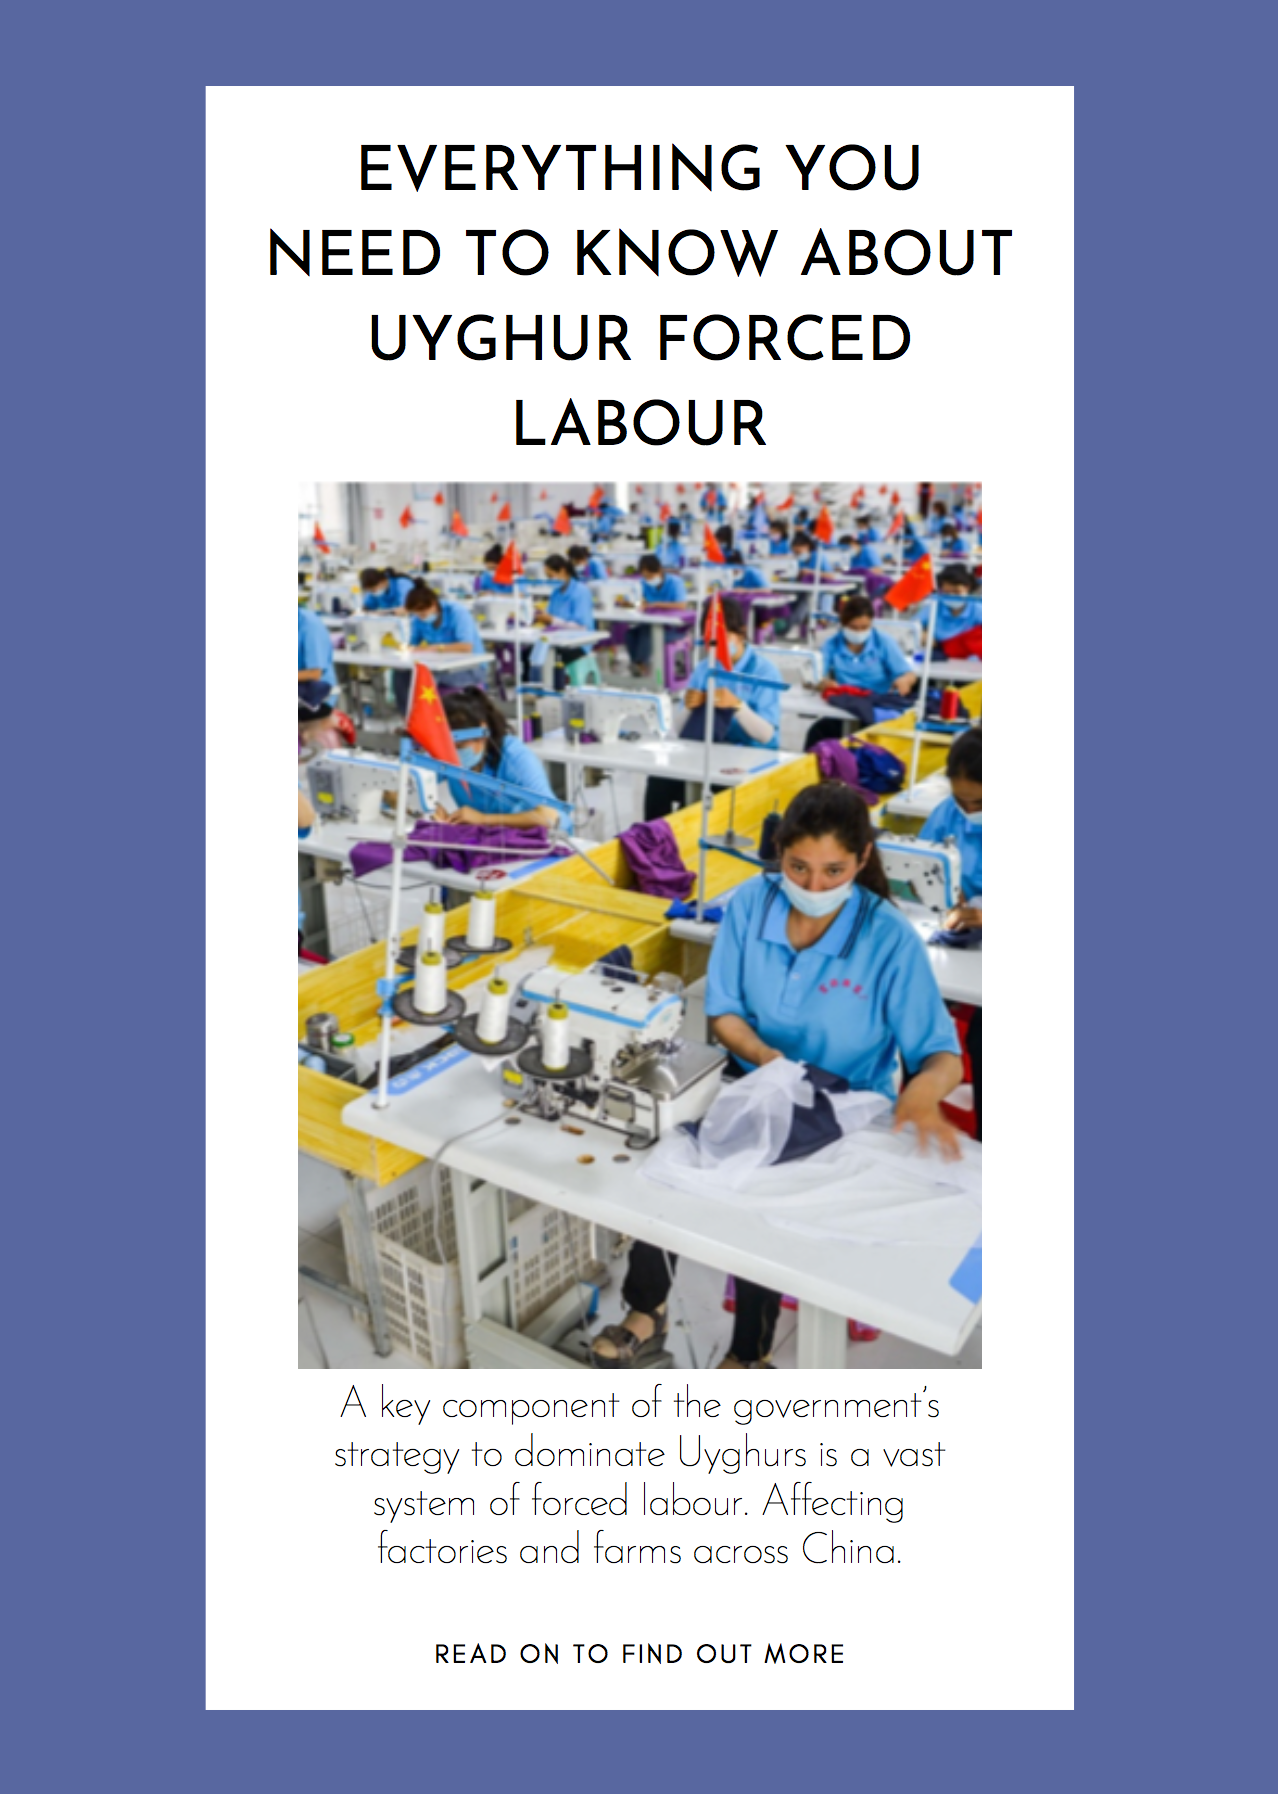 Everything you need to know about Uyghur forced labour